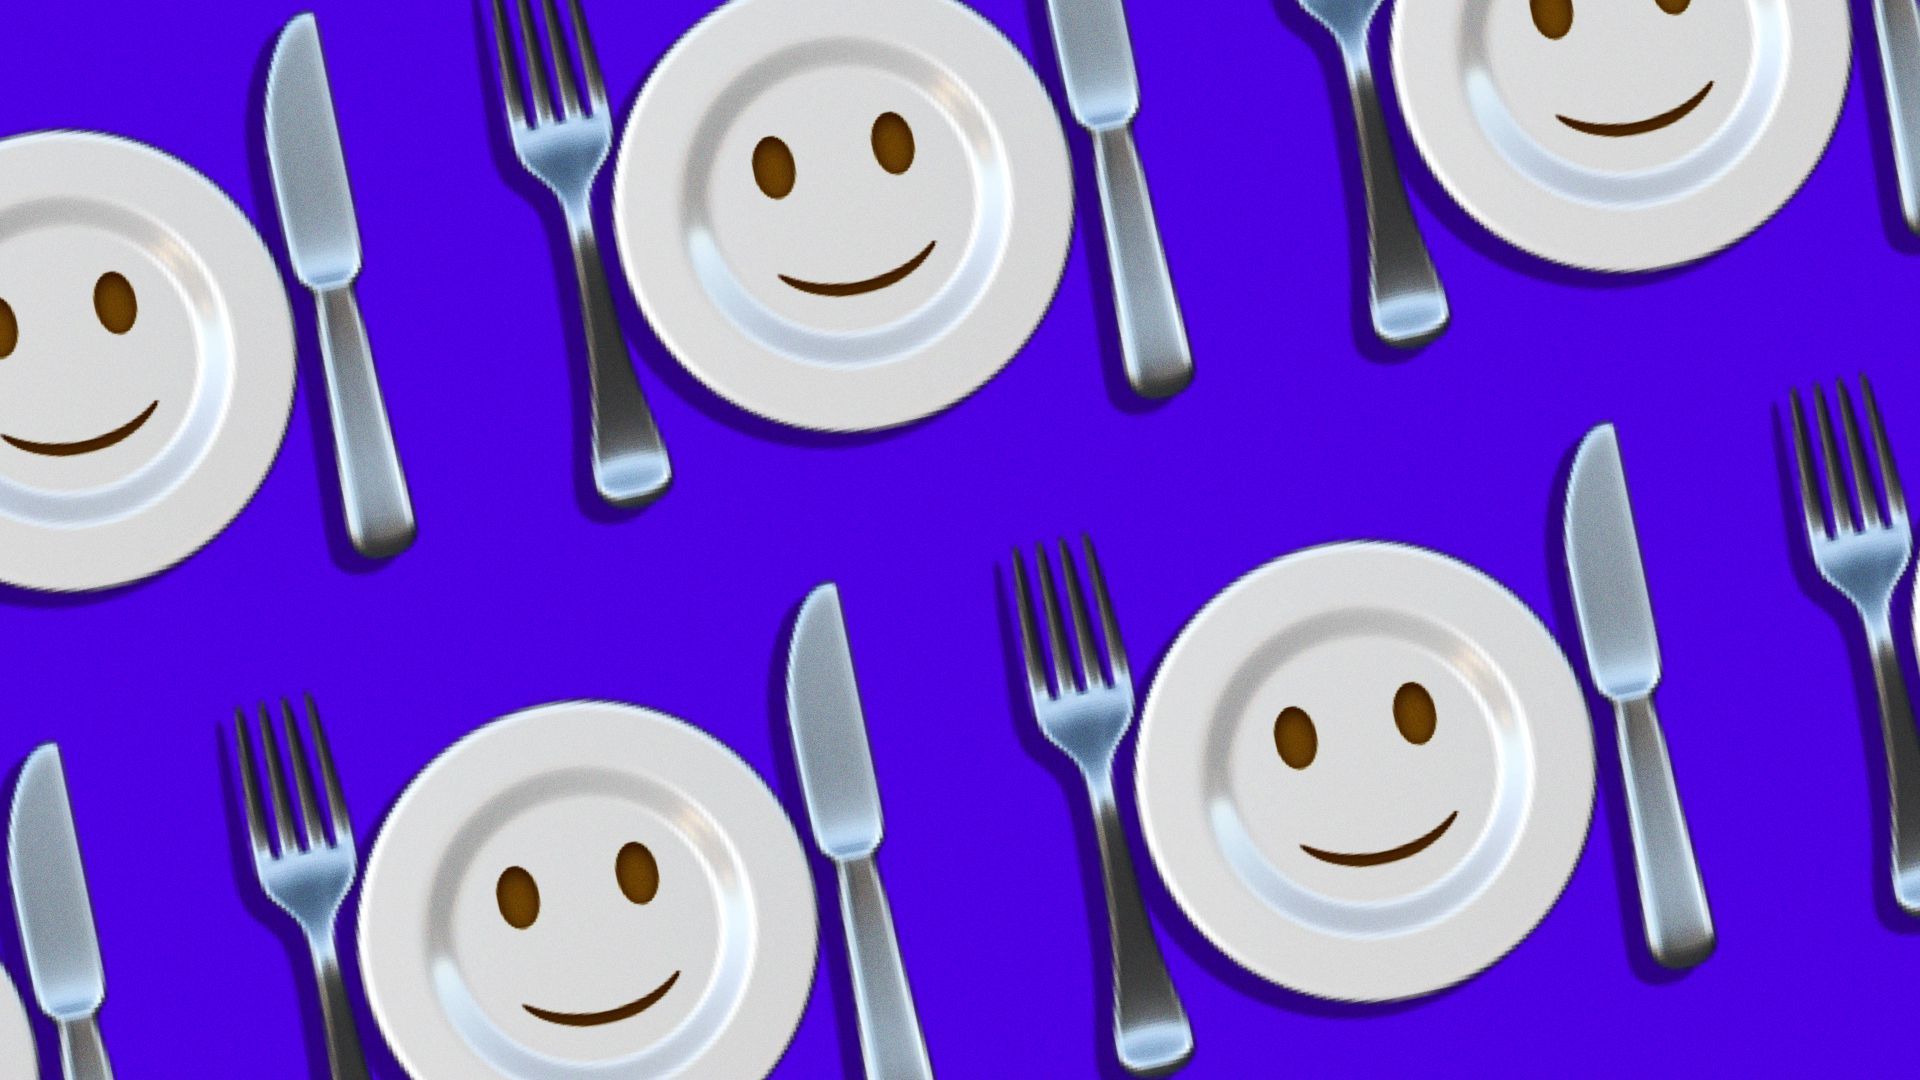 Illustration of repeating dinner plate emojis with smiley faces on them.